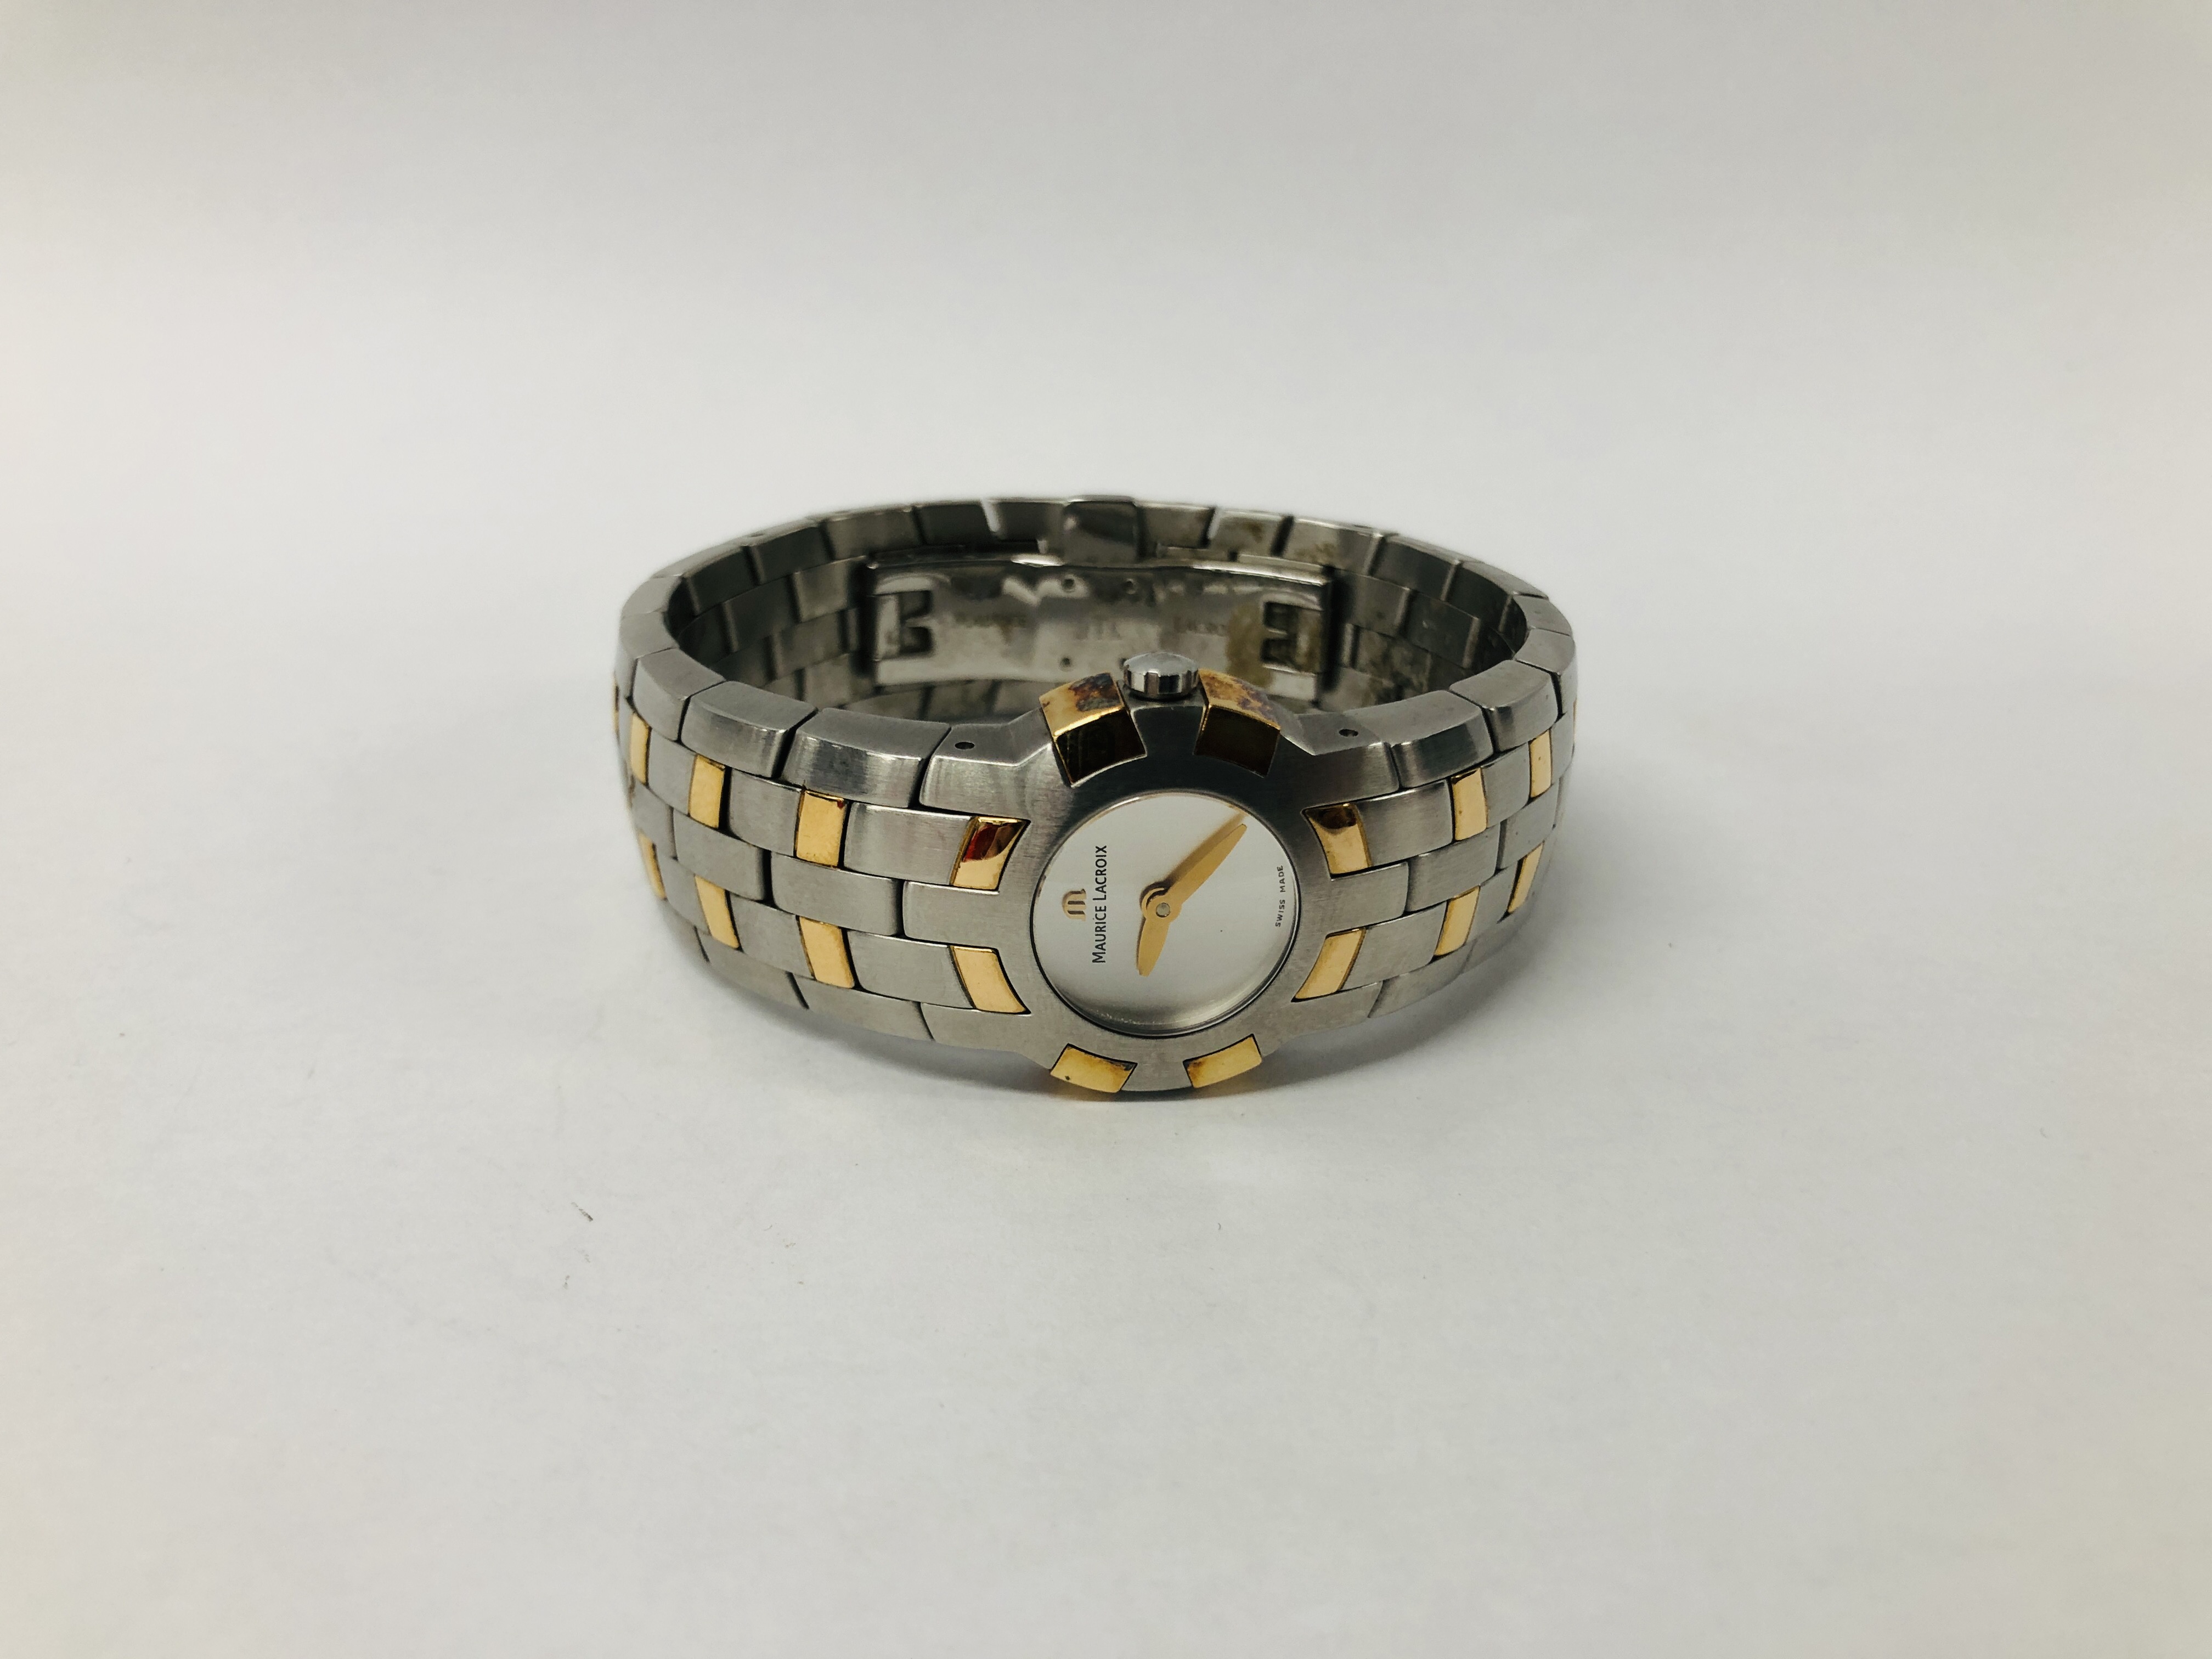 LADIES MAURICE LACROIX BRACELET WATCH THE CASE MARKED STAINLESS STEEL AND 18K 750